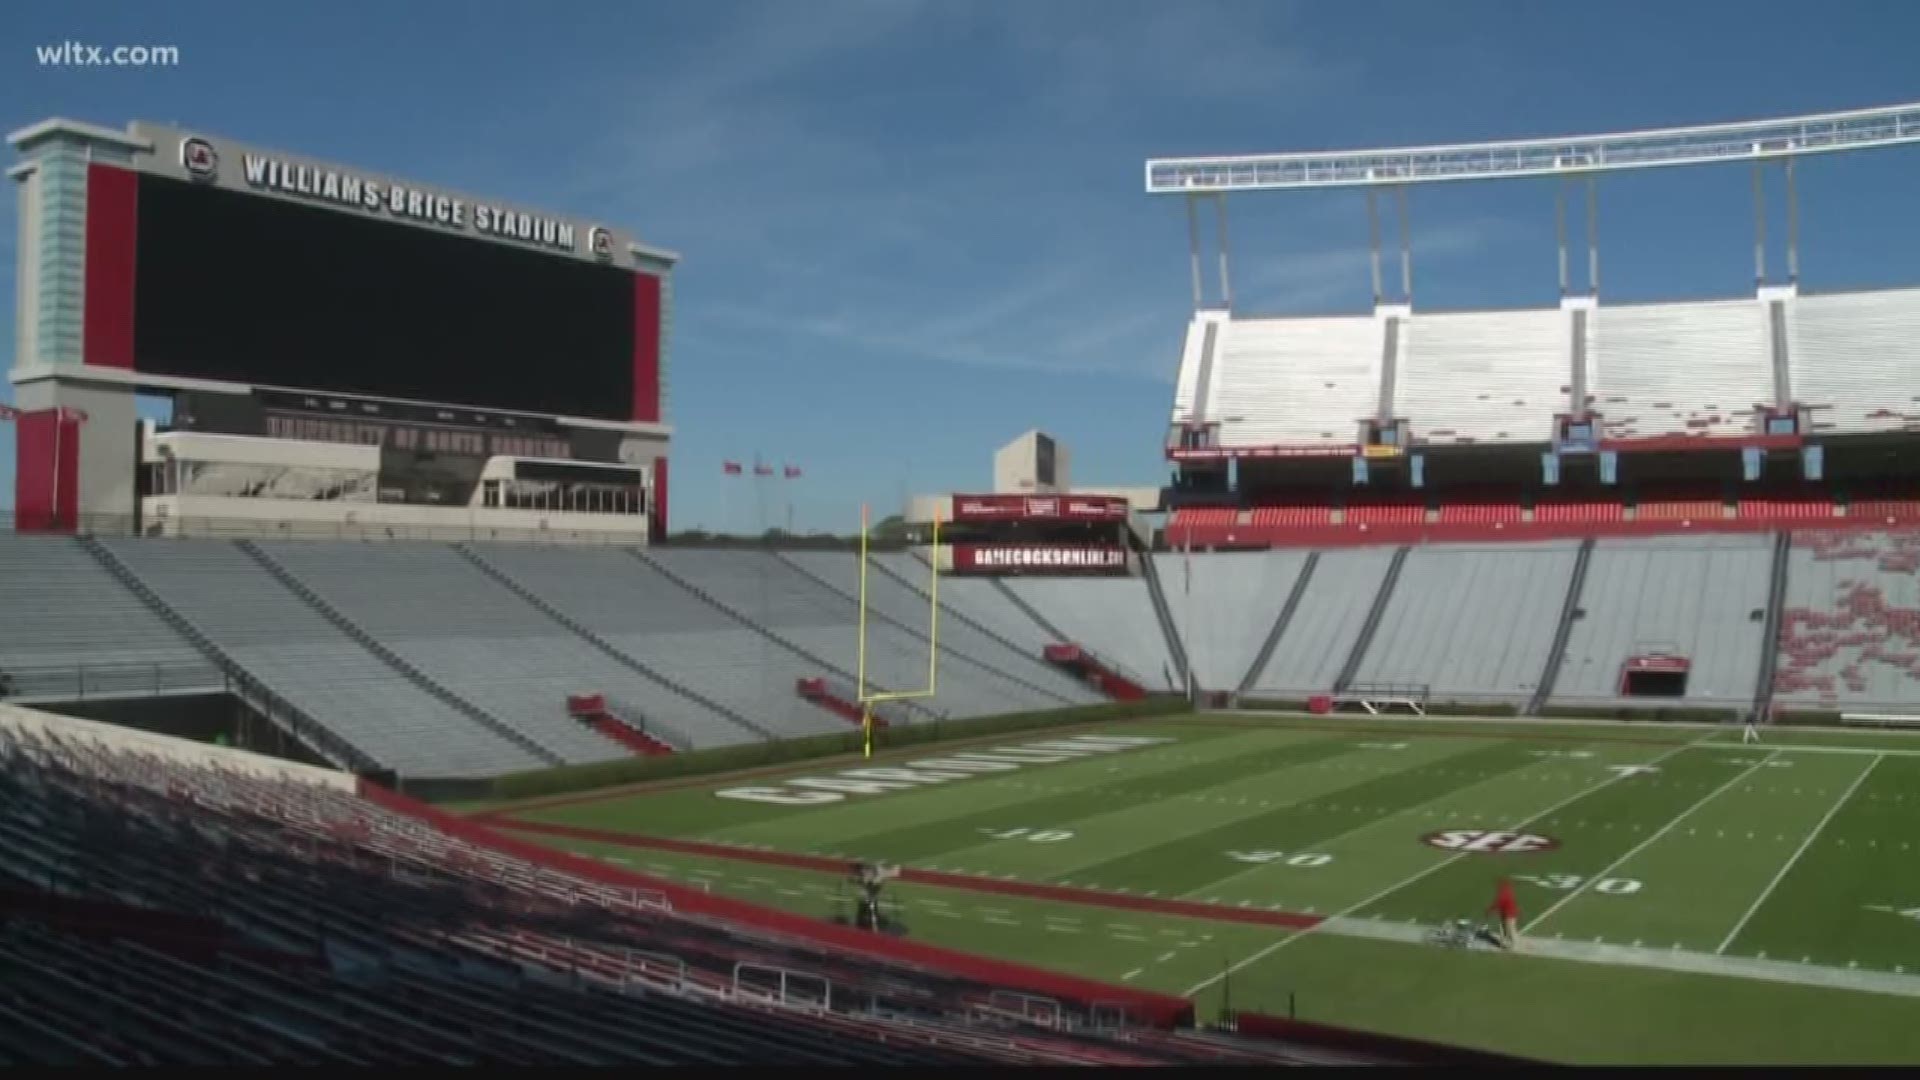 Williams-Brice stadium can be filled with thousands of fans at any home game.  The stadium was national recognized for their safety and security. 